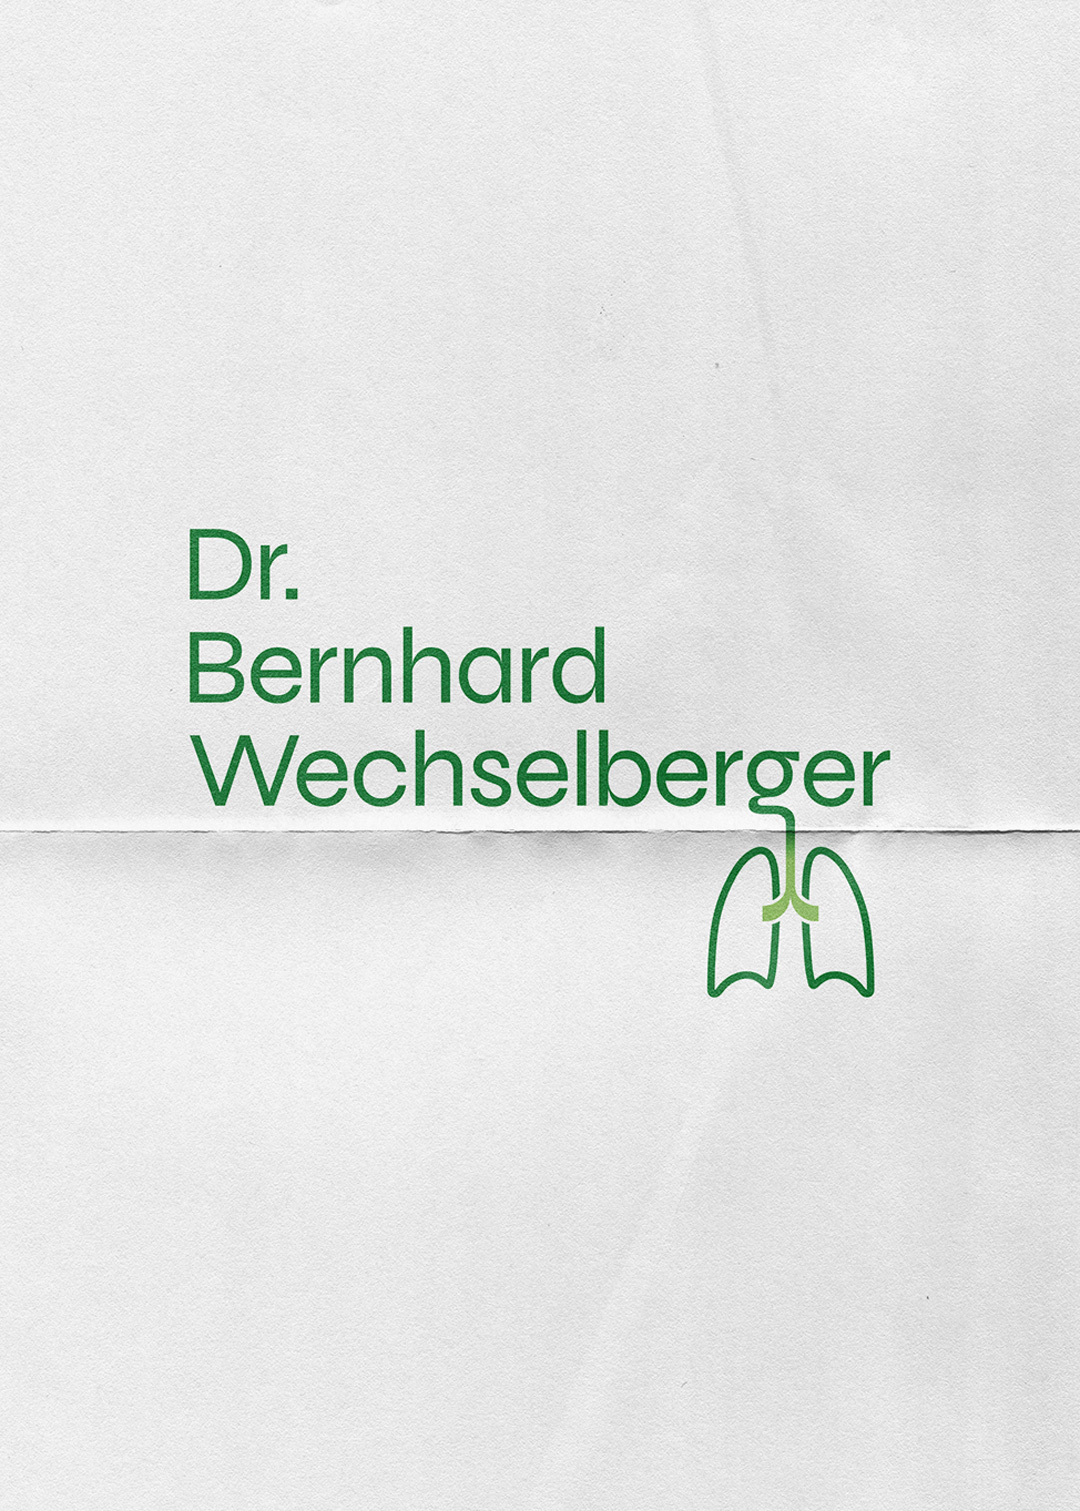 The logotype for Dr. Wechselberger on a piece of folded paper